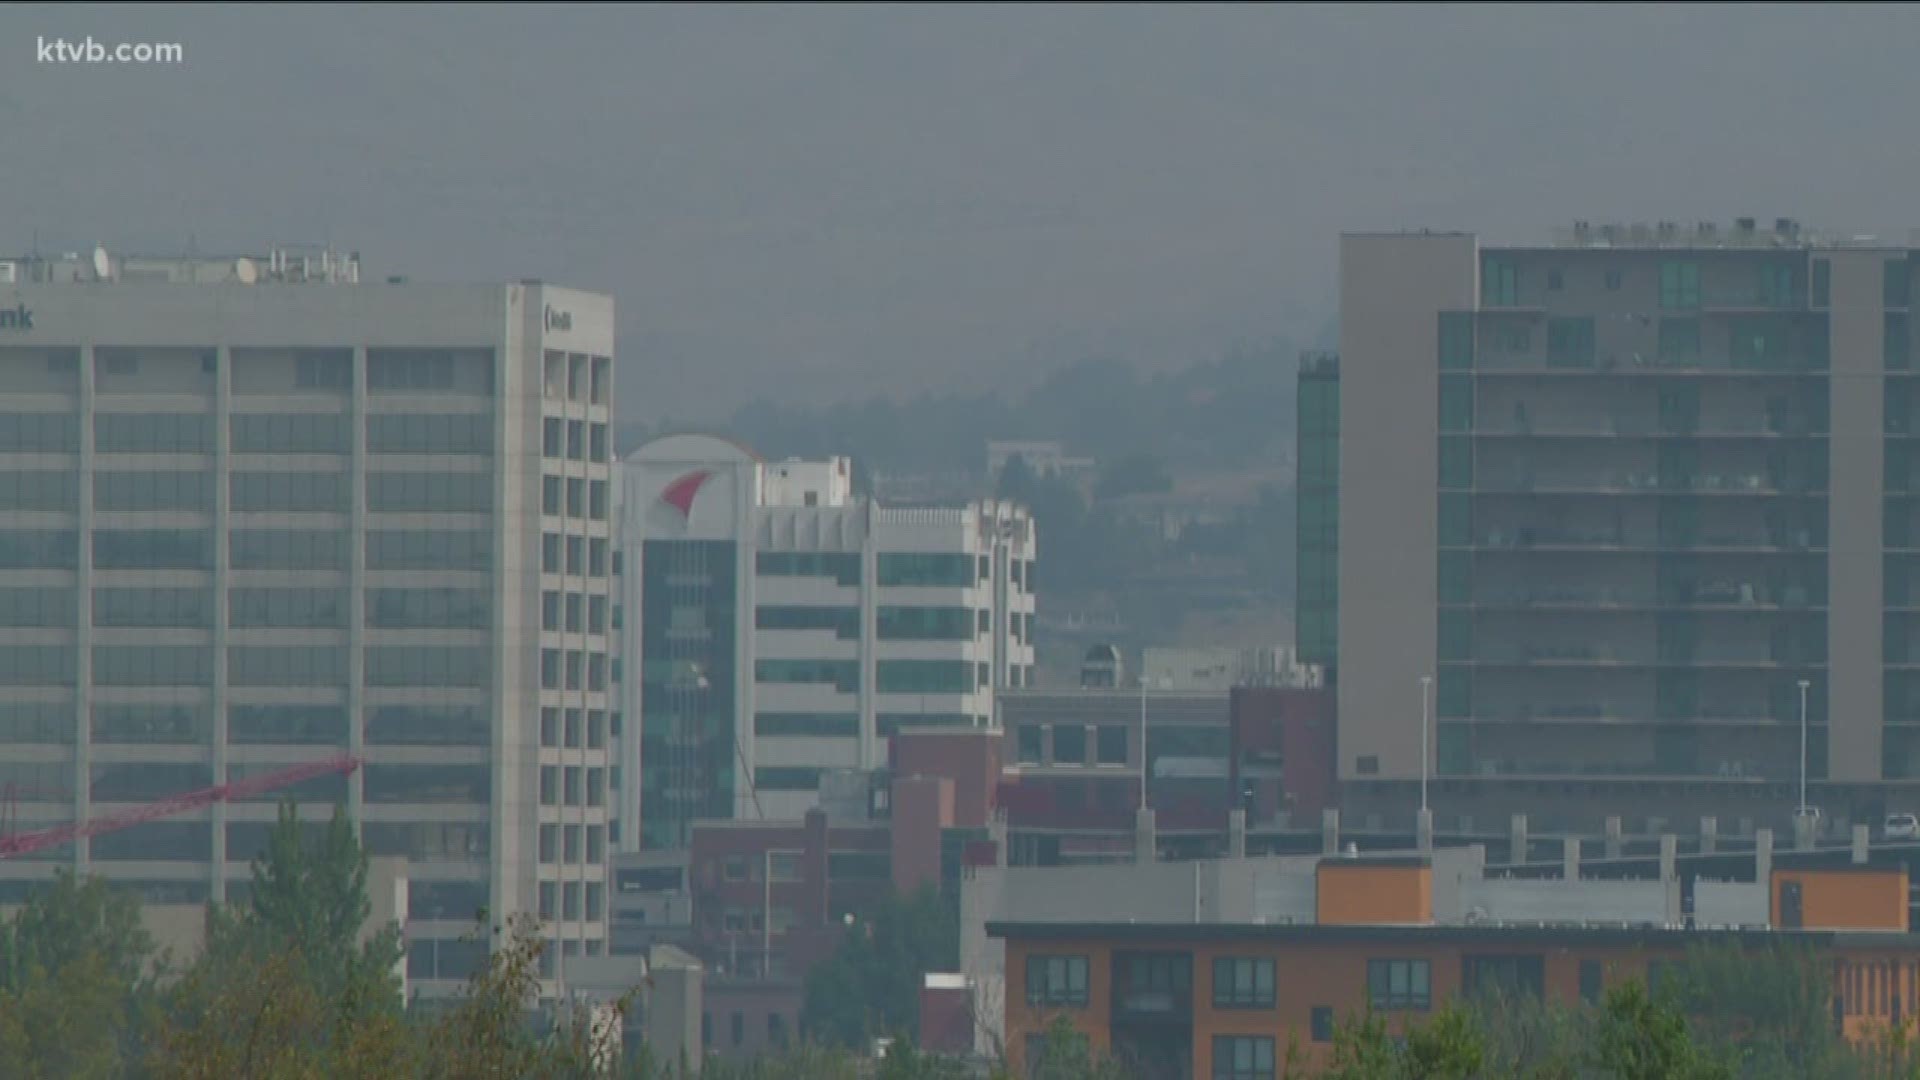 A new report says the air quality in Idaho is getting worse primarily due to wildfires.